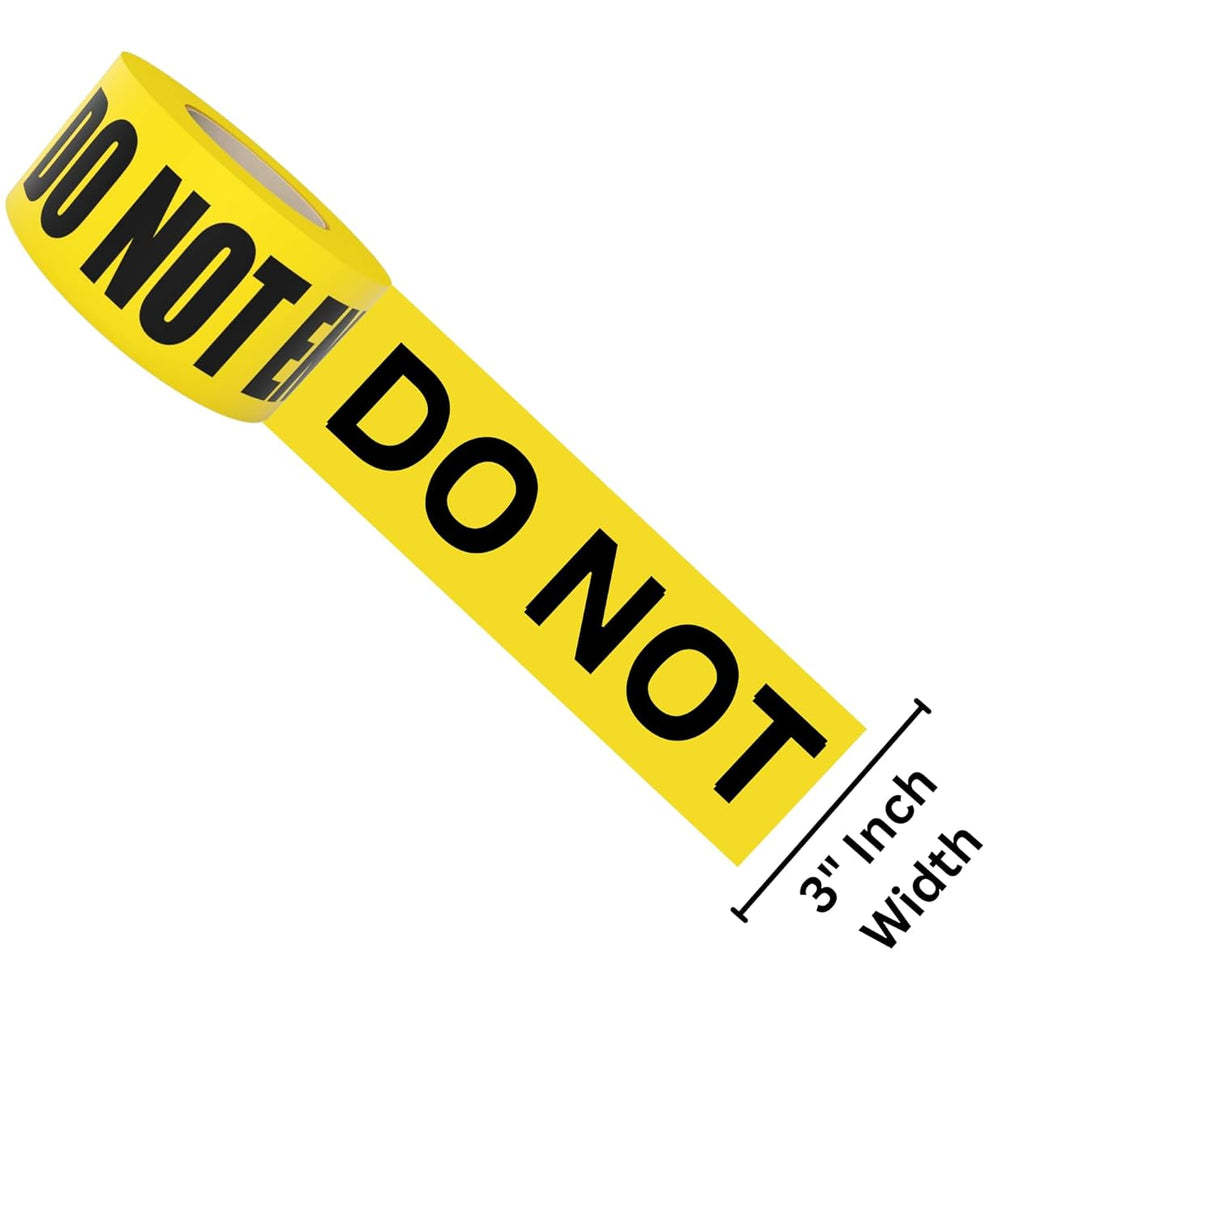 SINGHAL Do Not Enter Barricade Tape 3 Inch X 300 Meter, Bright Yellow with Bold Black Print, Wide for Maximum Readability, Tear Resistant Design, High Visibility 300mtr Pack of 3